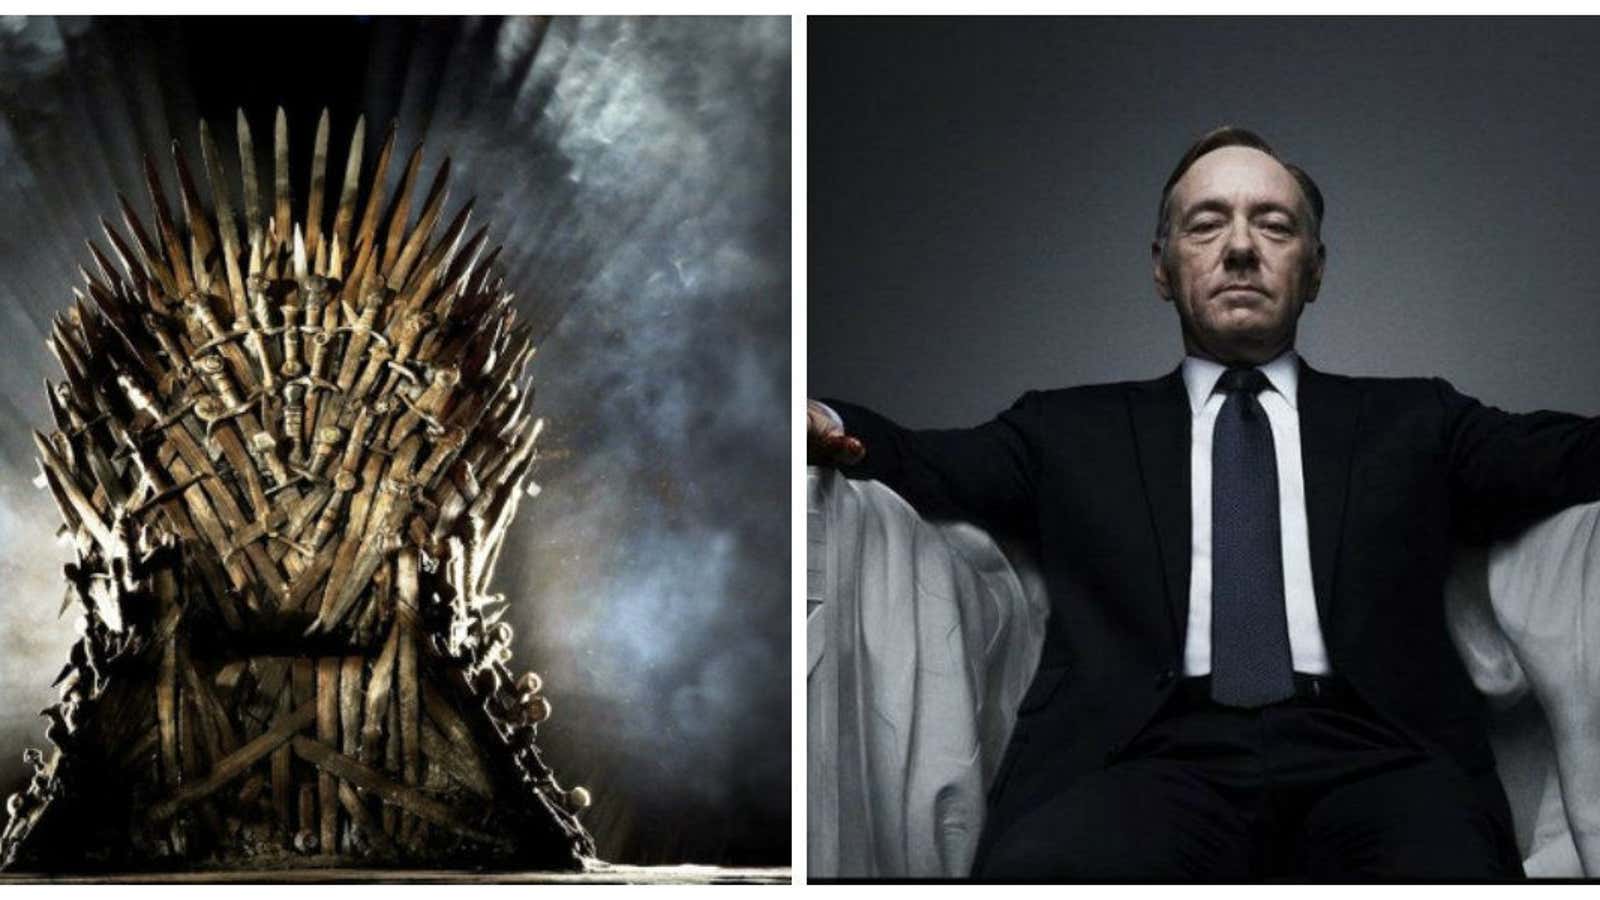 Who will get the Iron Throne?